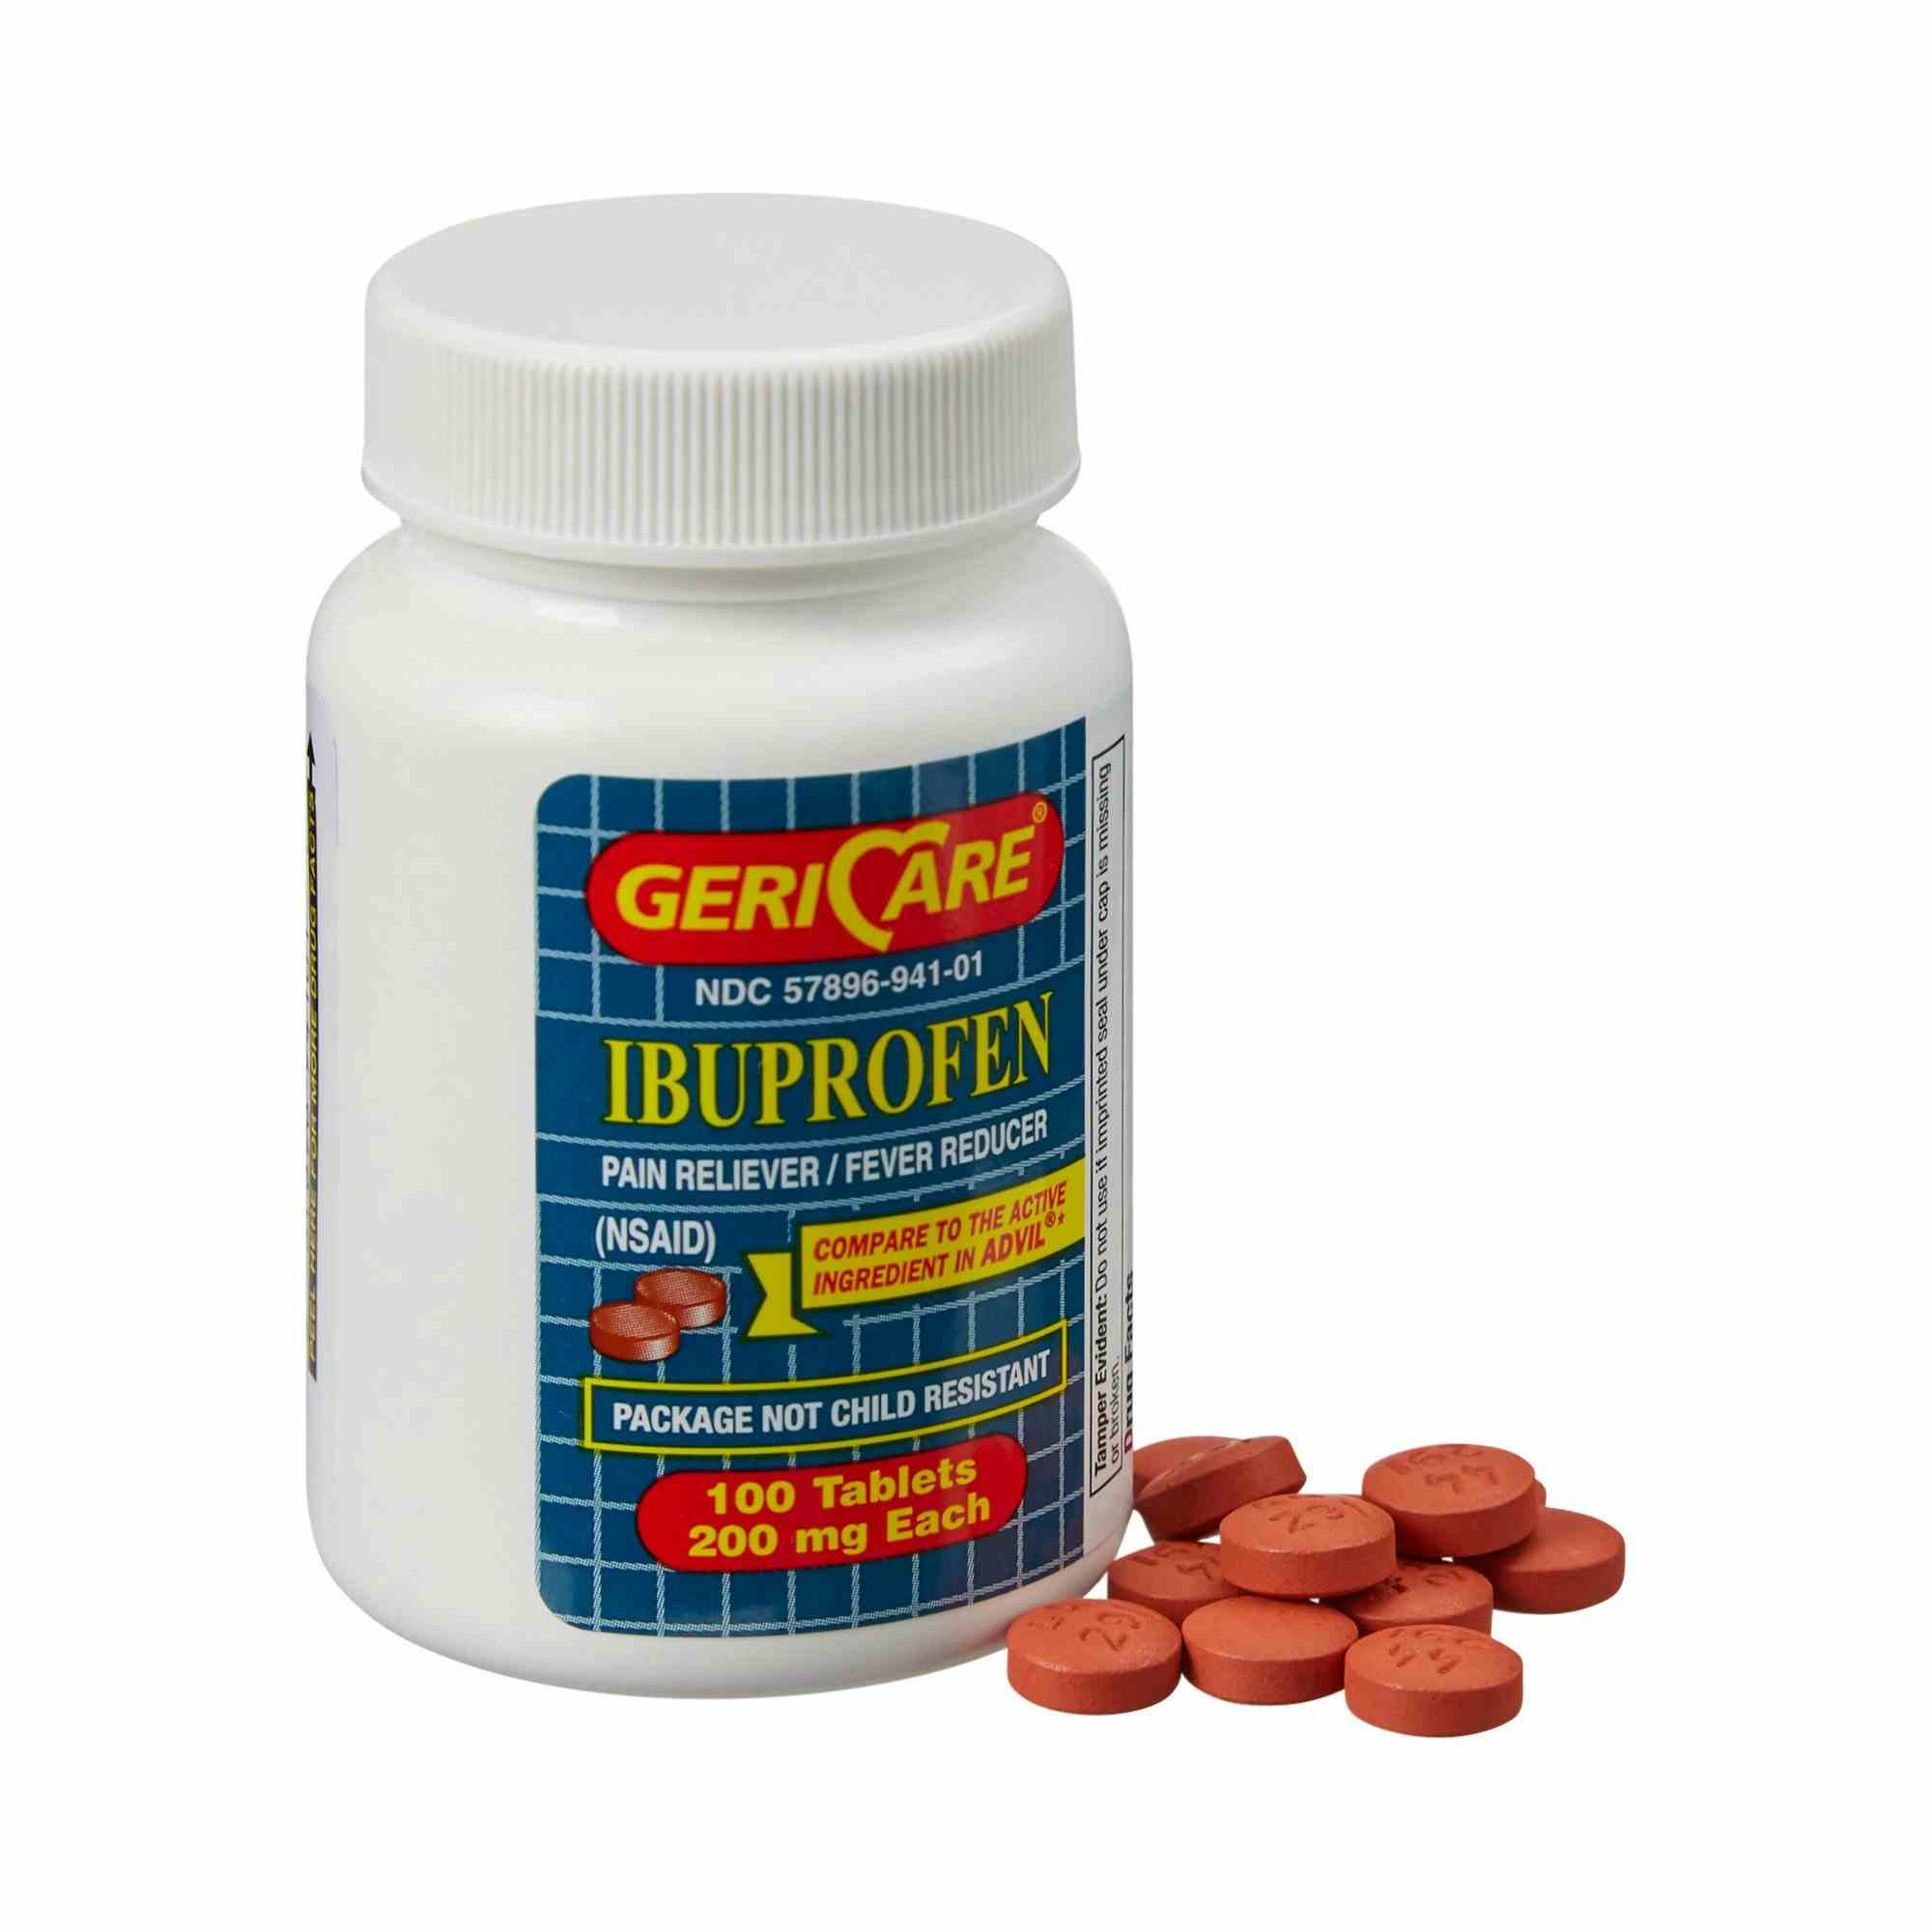  Geri-Care Ibuprofen Pain Reliever/Fever Reducer, 200 mg, 100 Tablets, 60-941-01, 1 Bottle